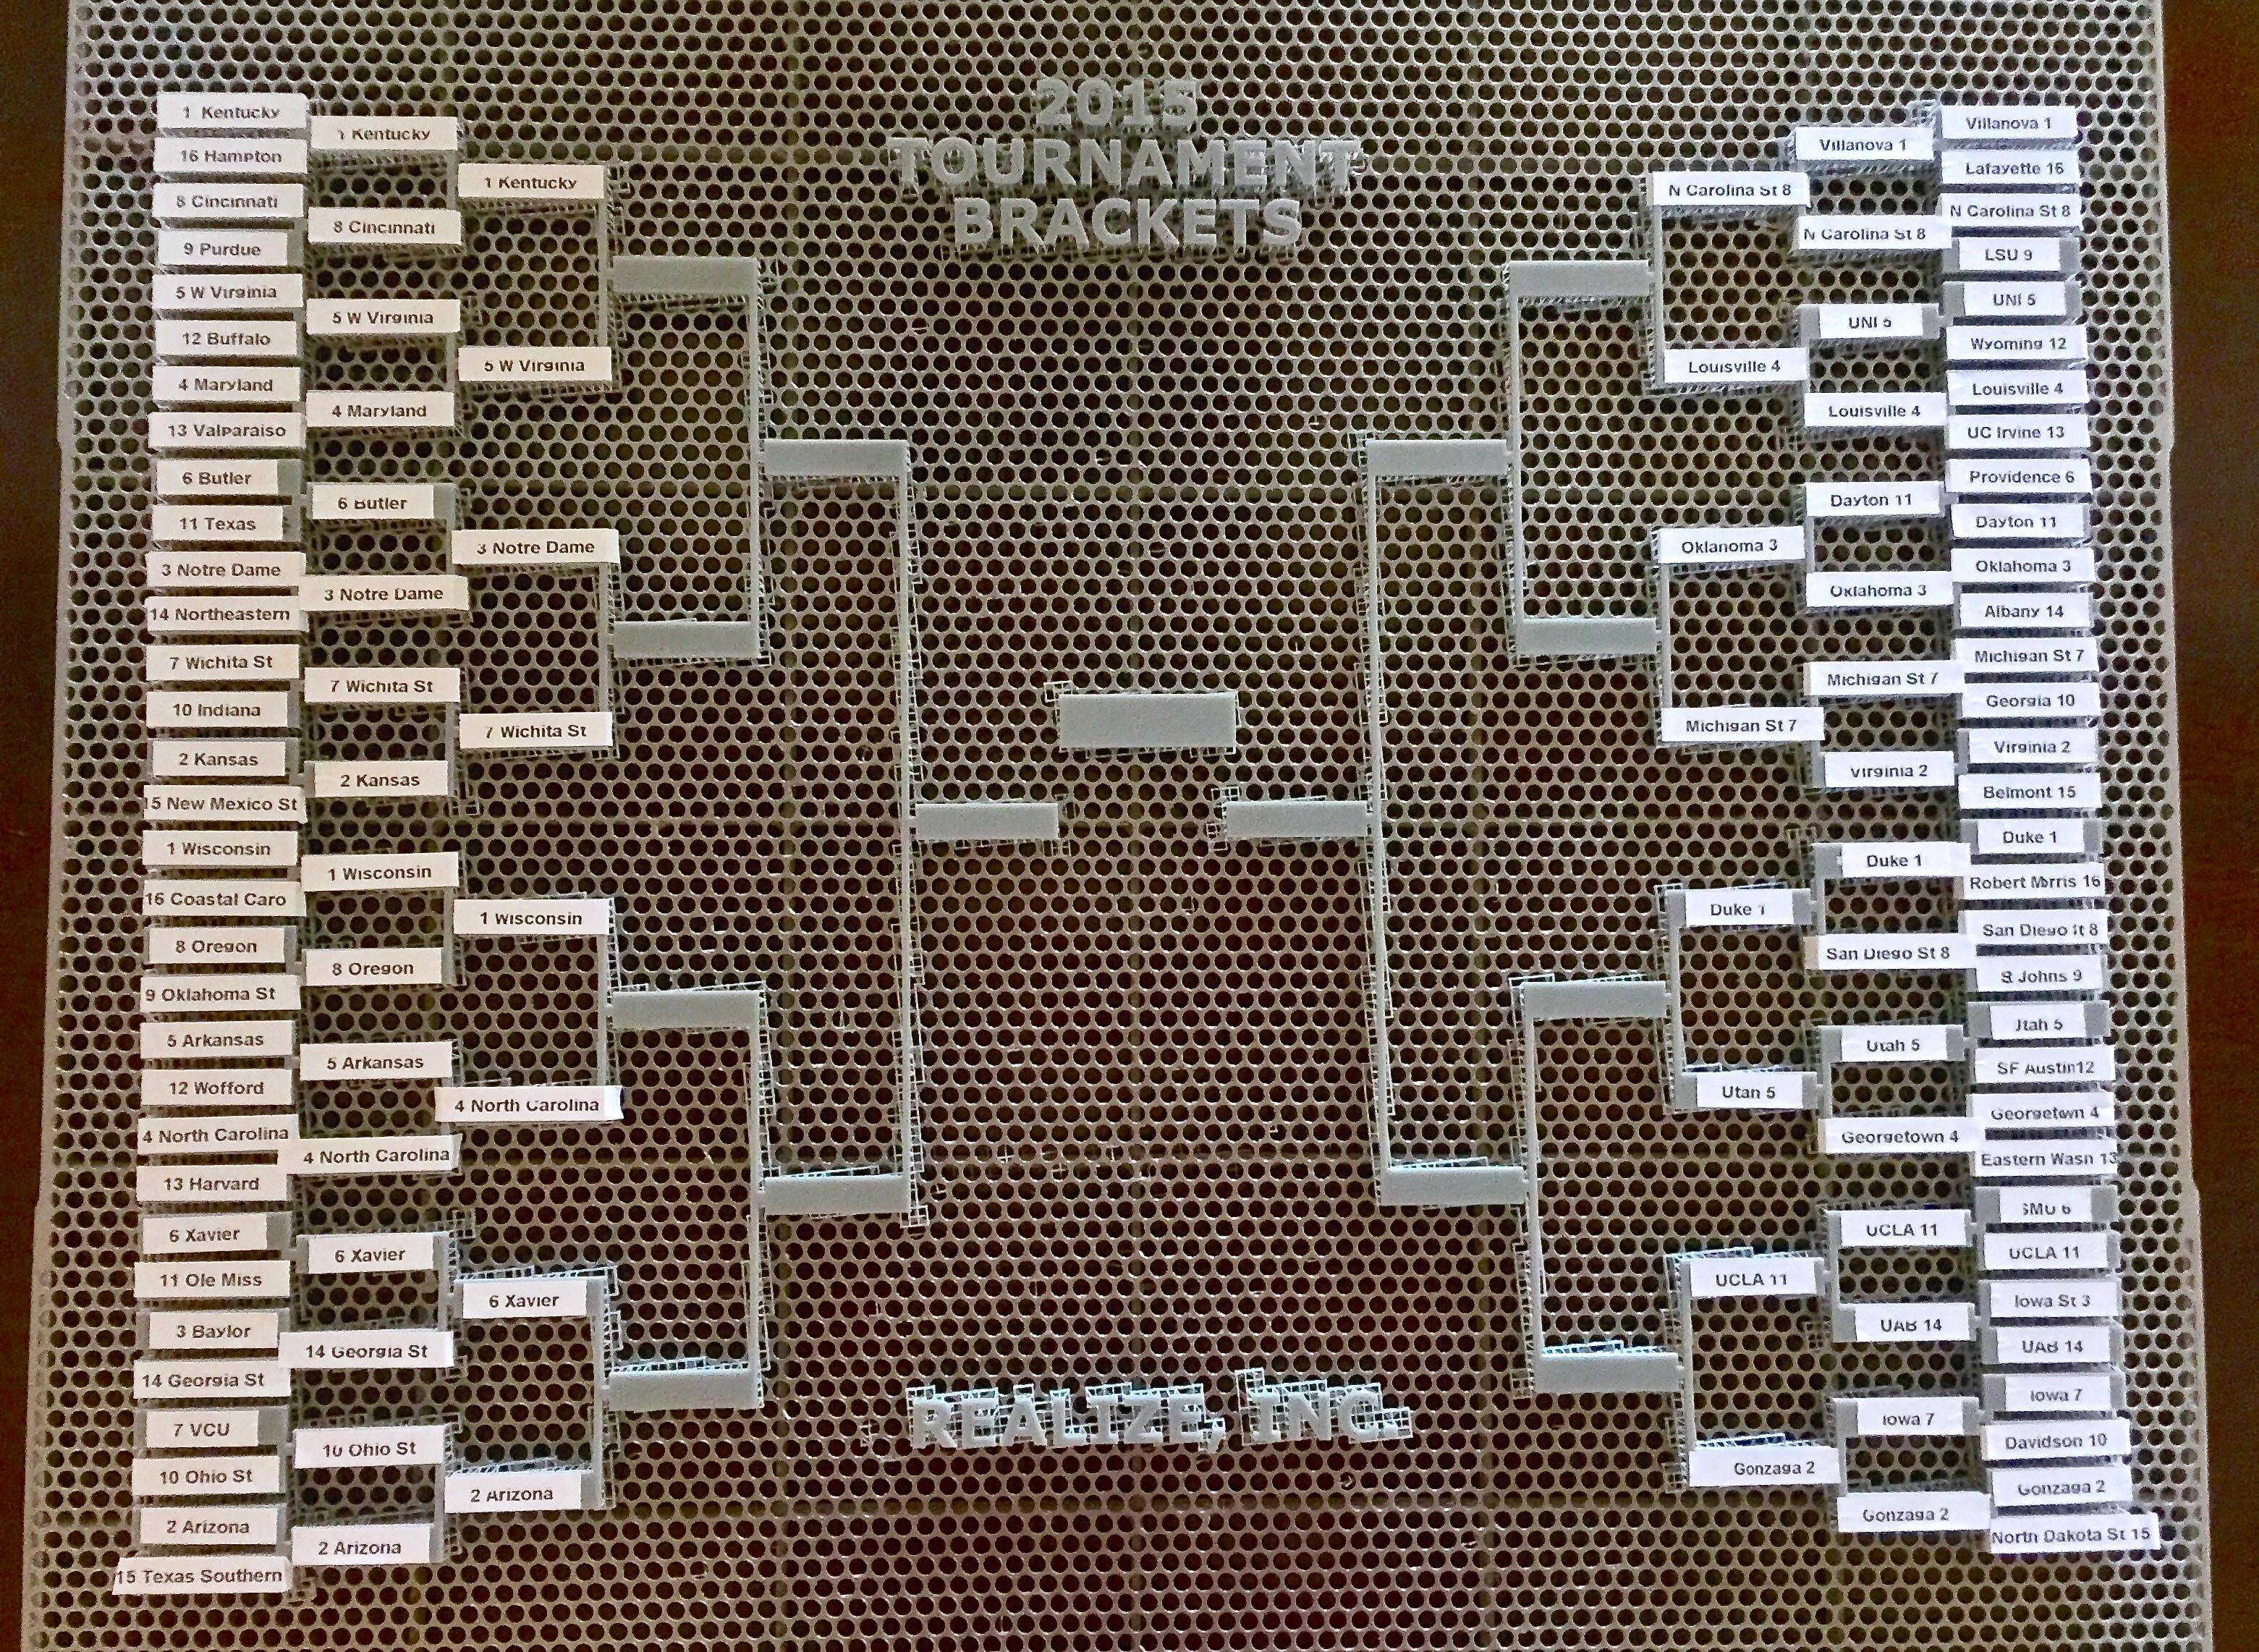 The World’s First 3D Printed NCAA College Tournament Bracket is Created